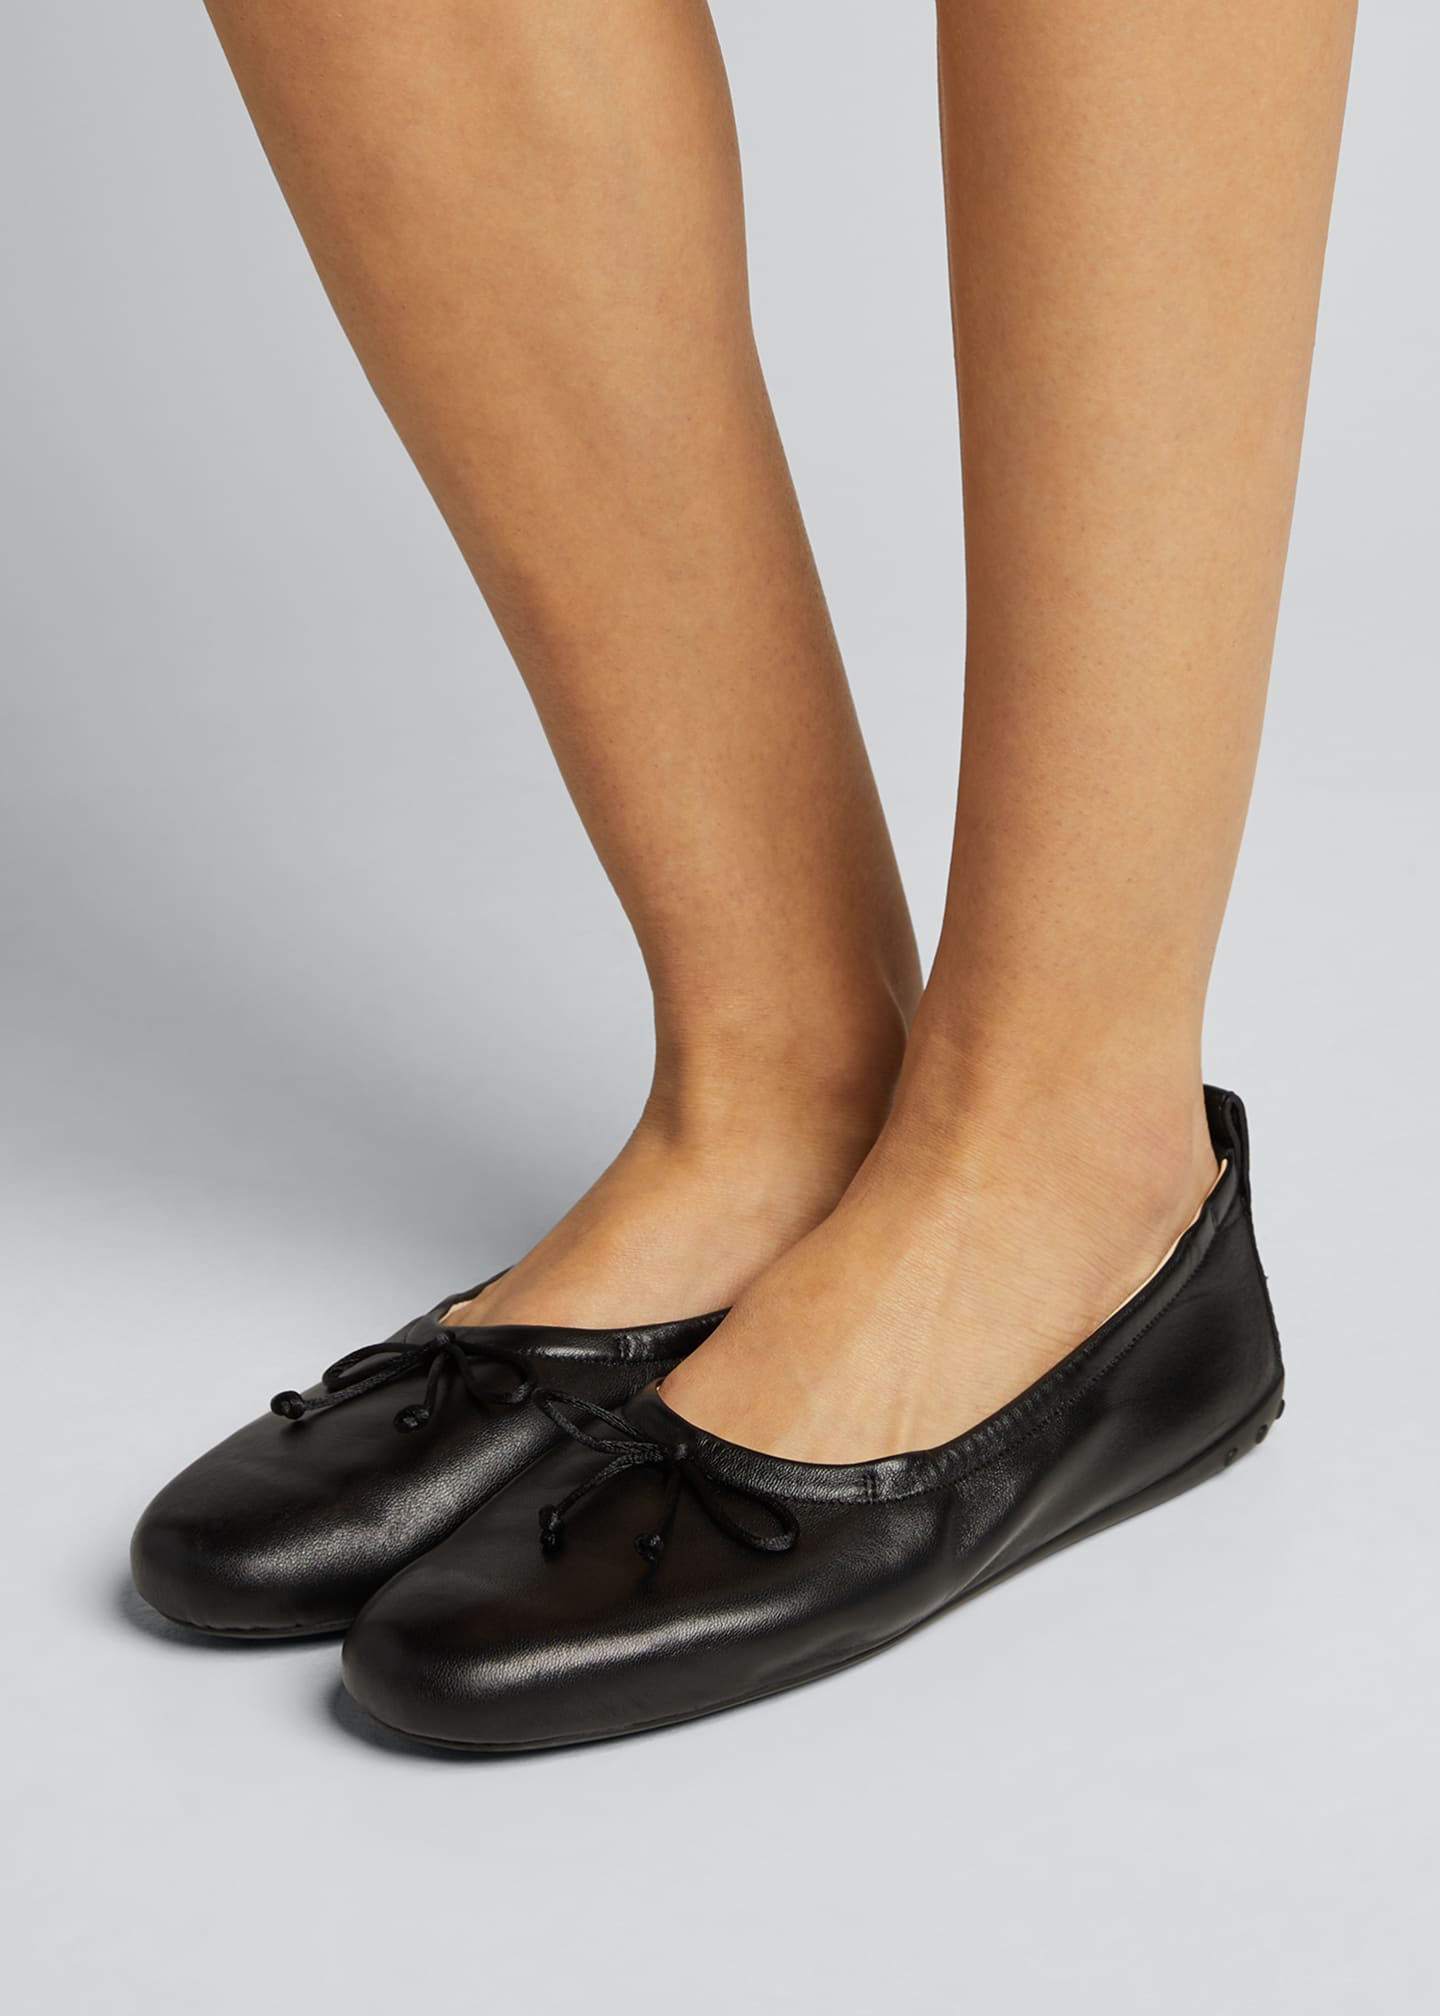 tods ballerina shoes